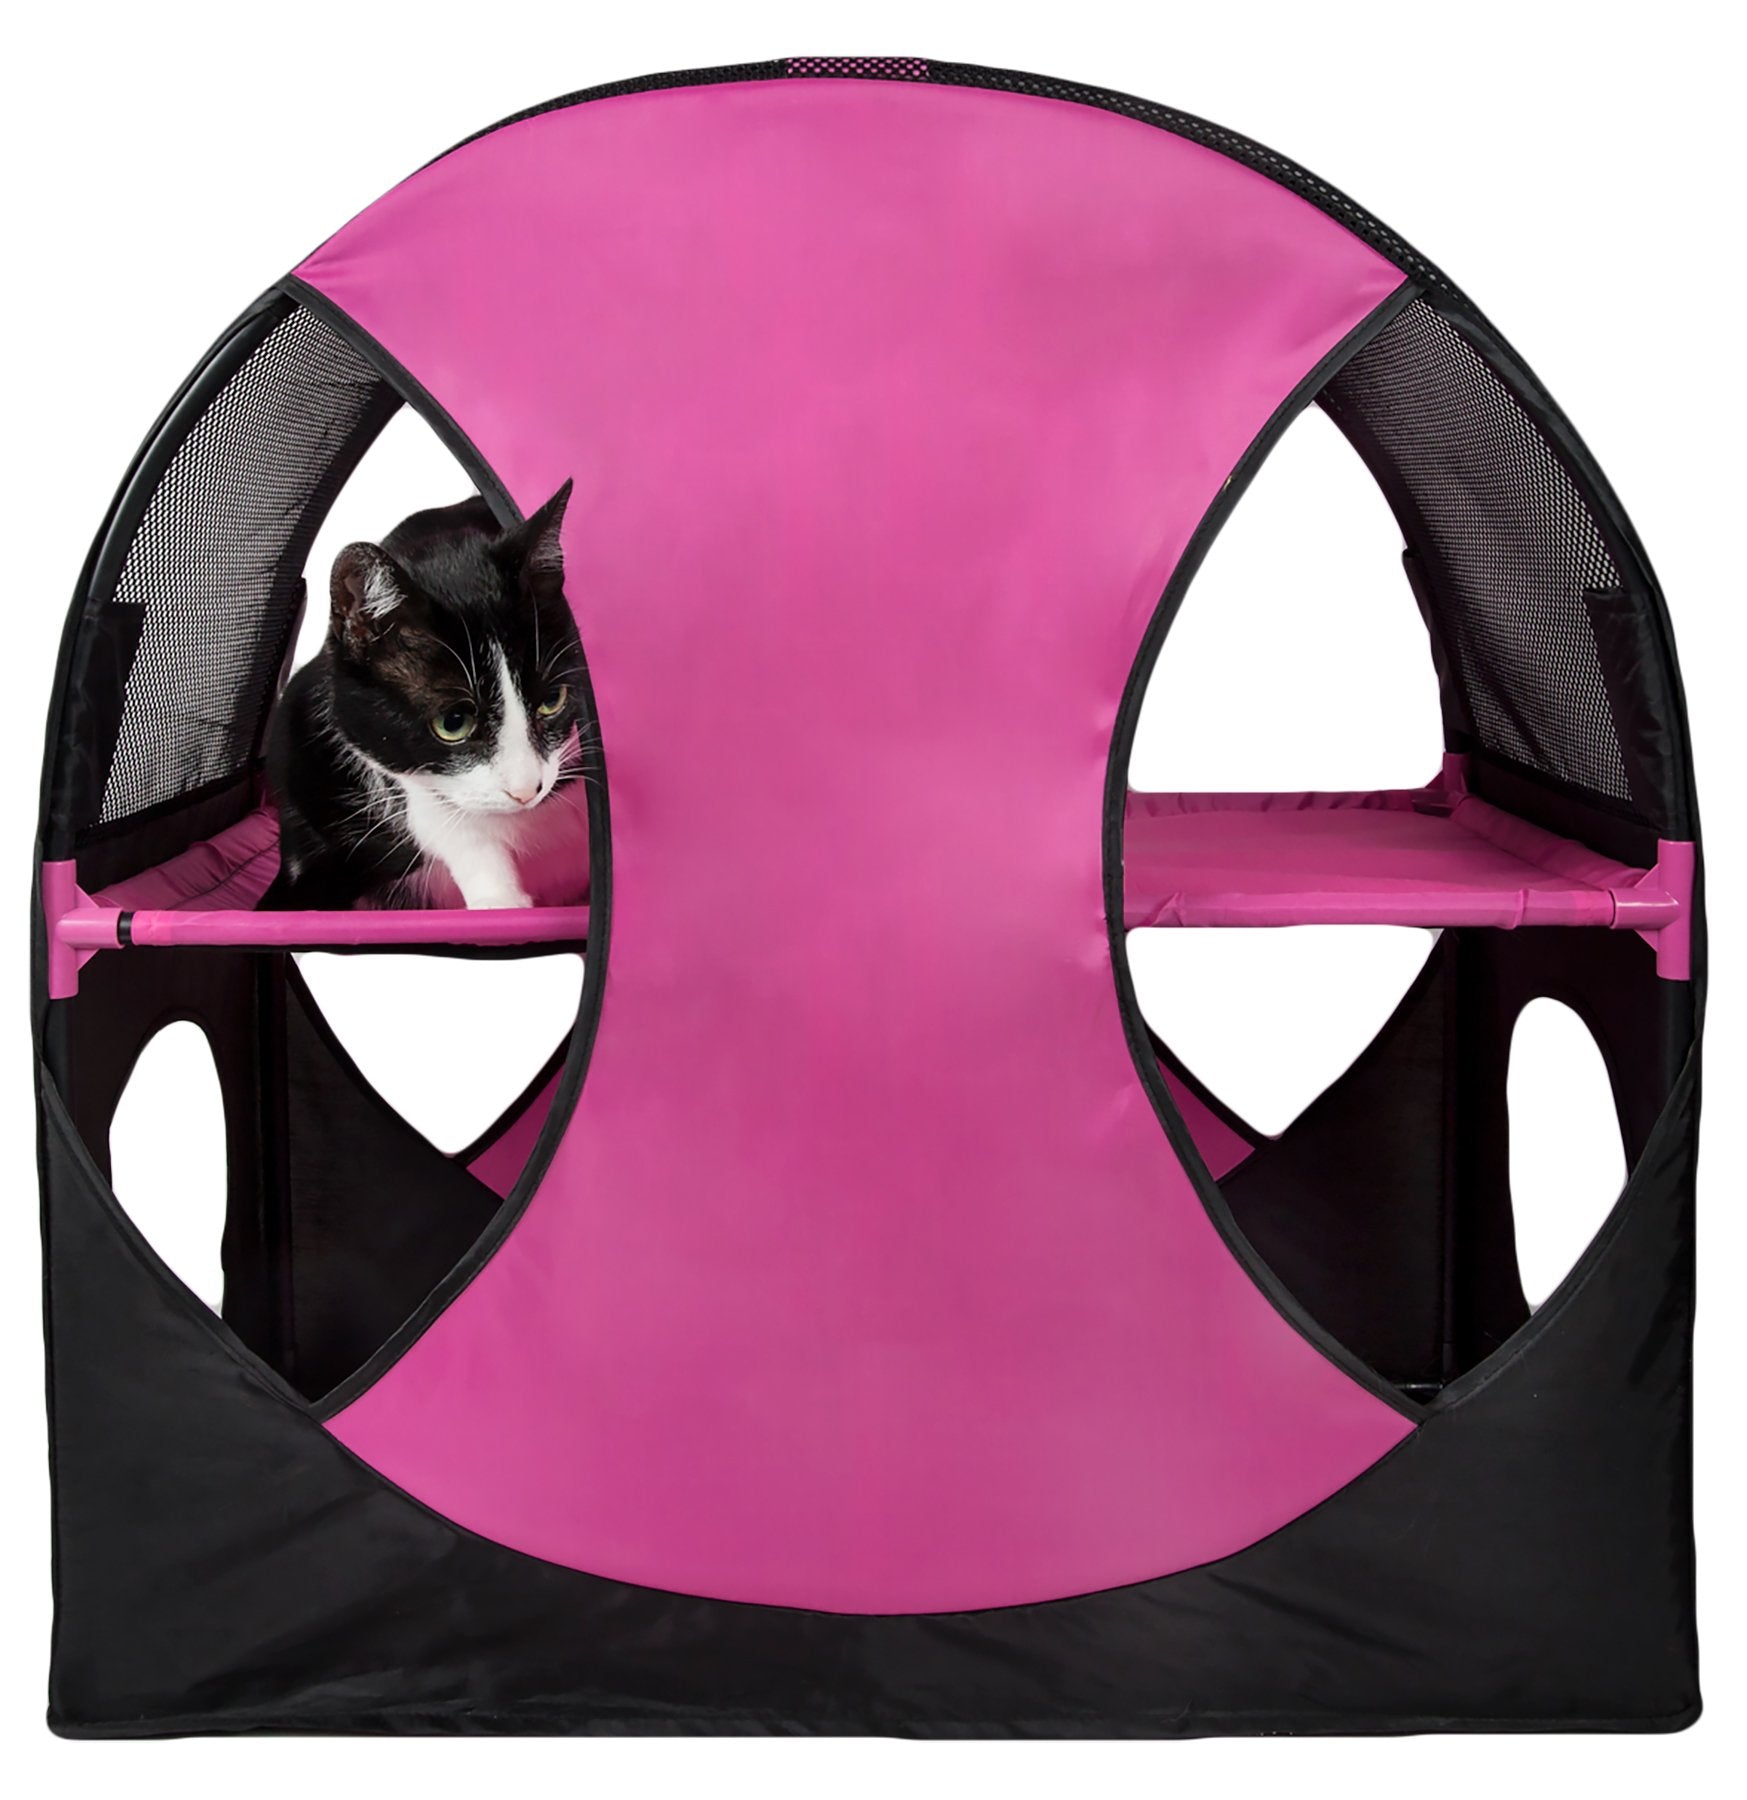 Pet Life Kitty-Play Travel Cat House - Pink